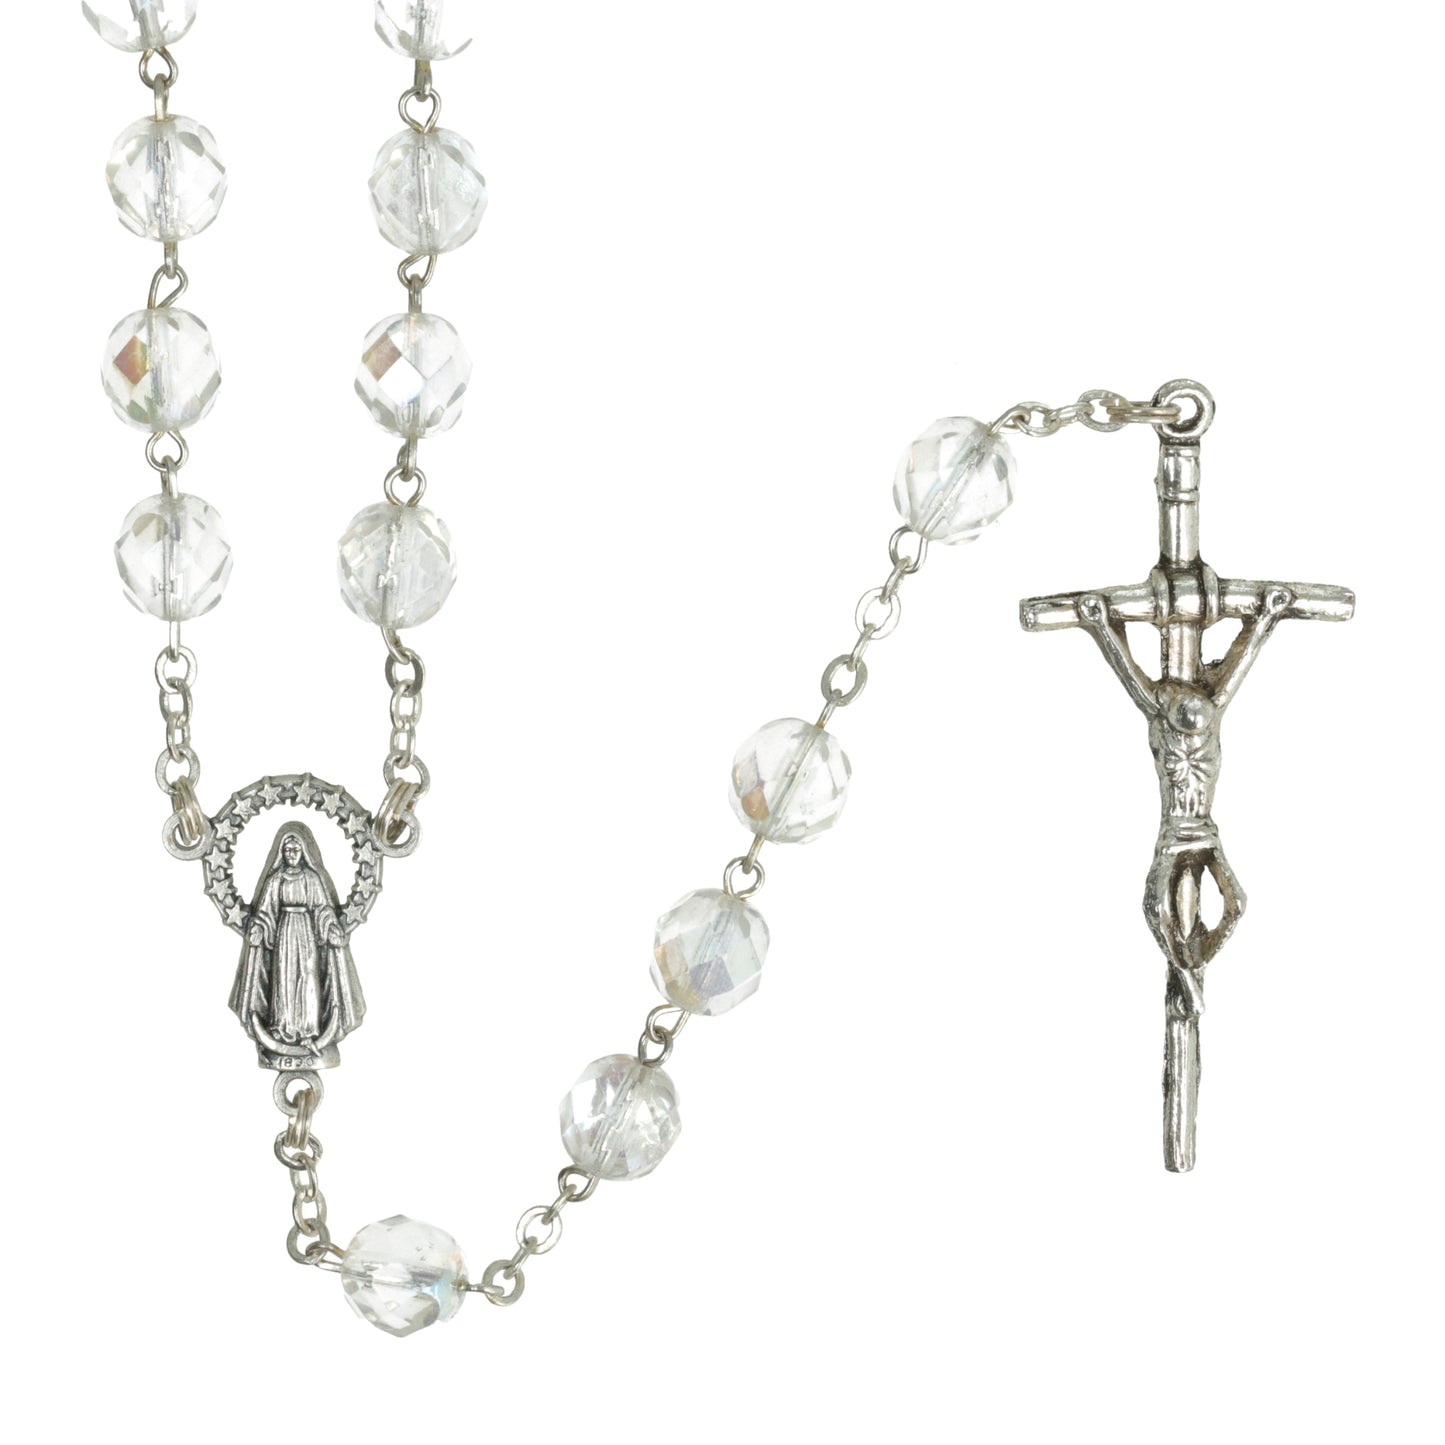 Crystal Rosary 8mm. Souvenirs from Italy